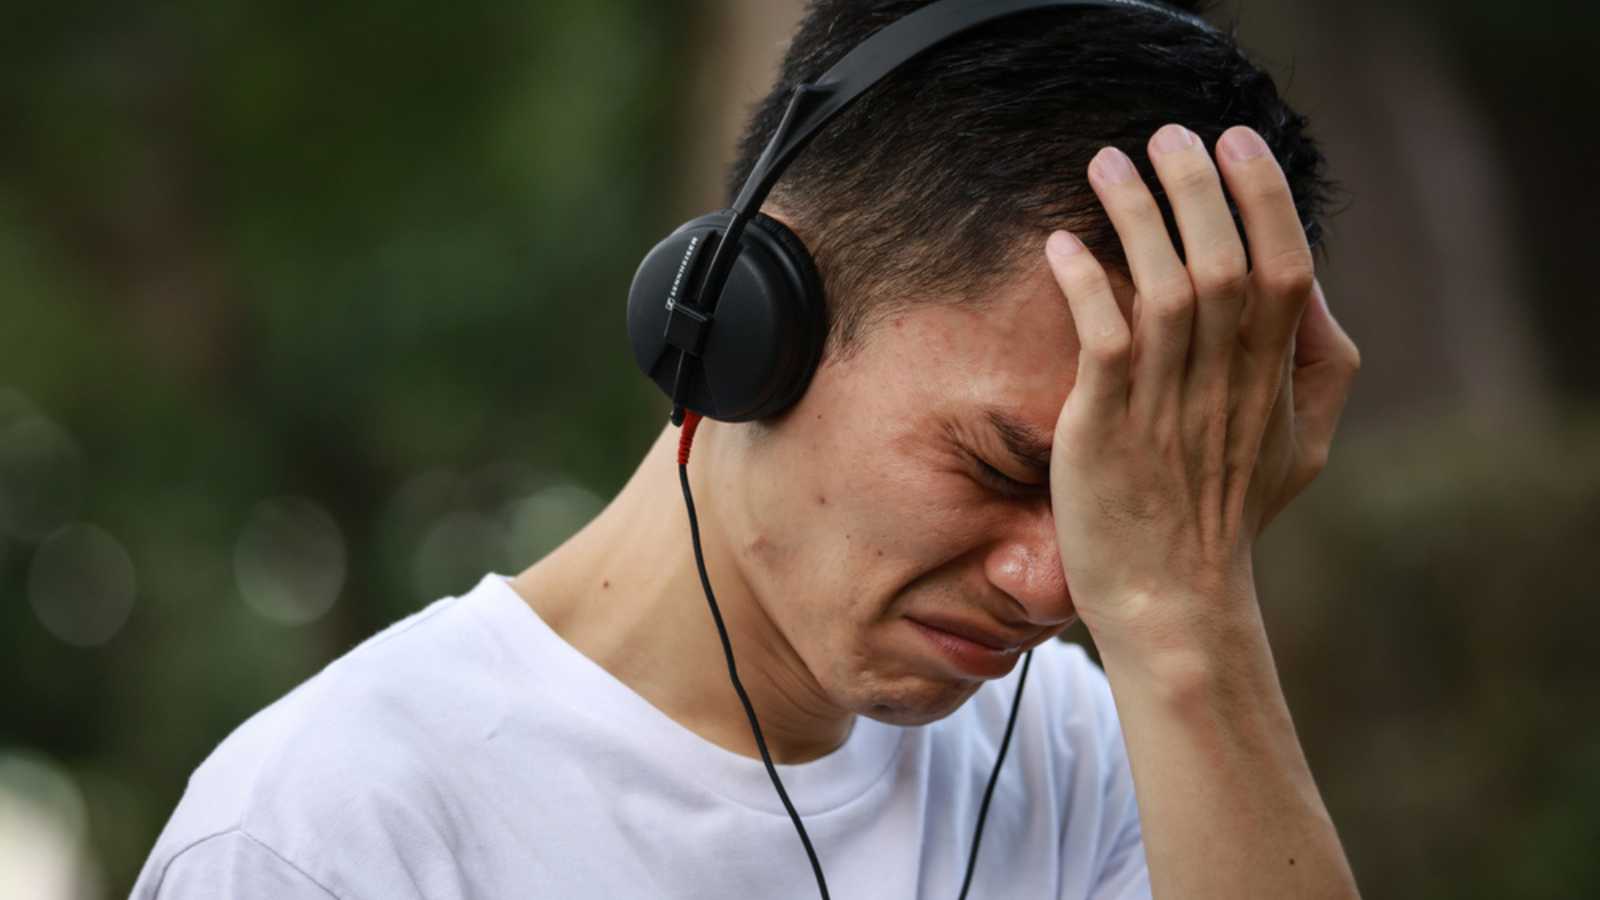 Man Crying While Listening To Music